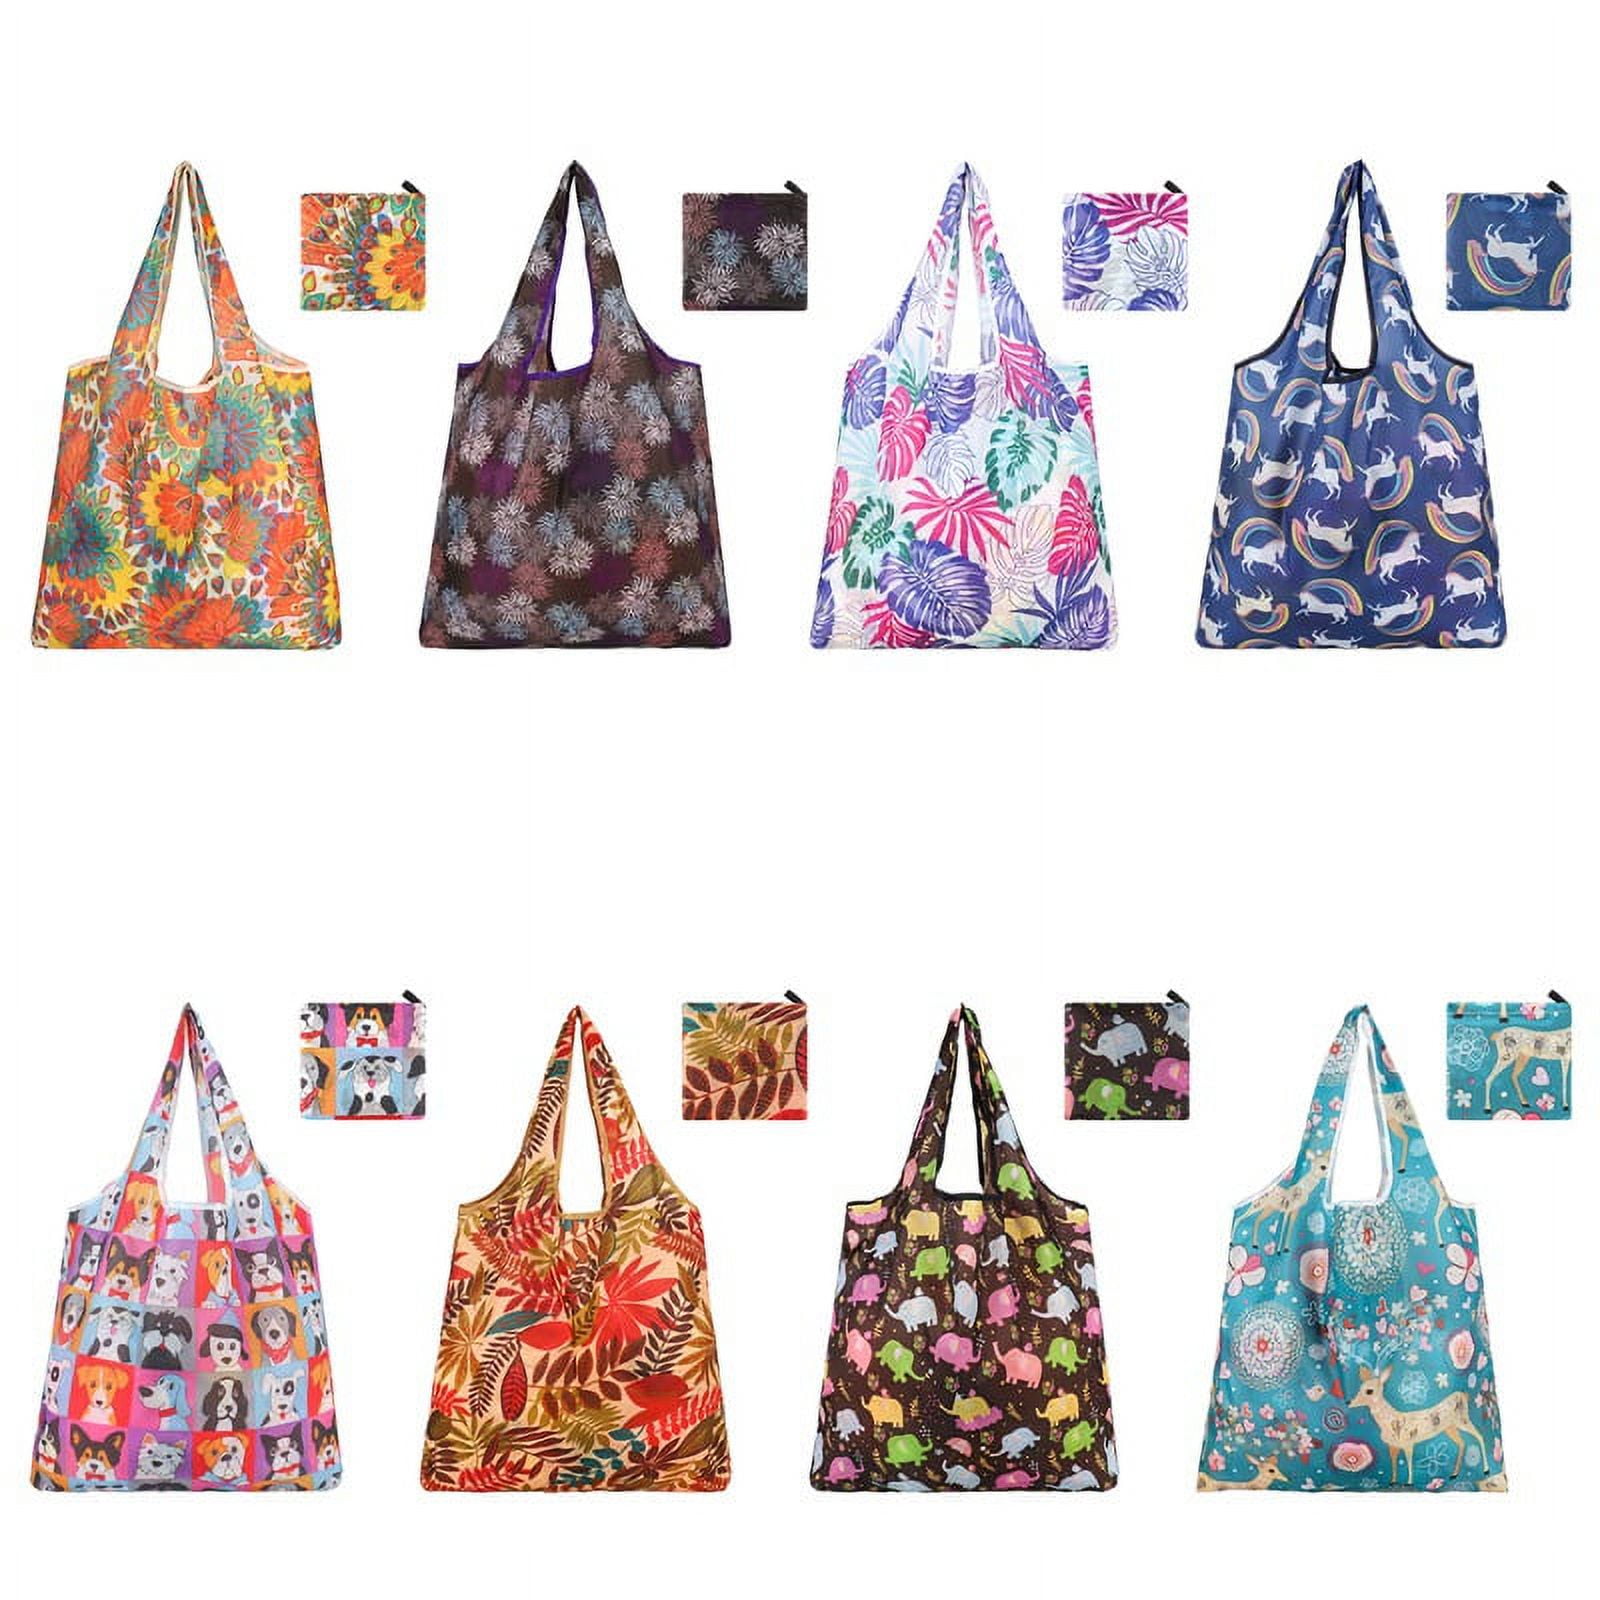 LUIISIS 8 Pcs Reusable Grocery Bags, Foldable Eco-Friendly Shopping ...